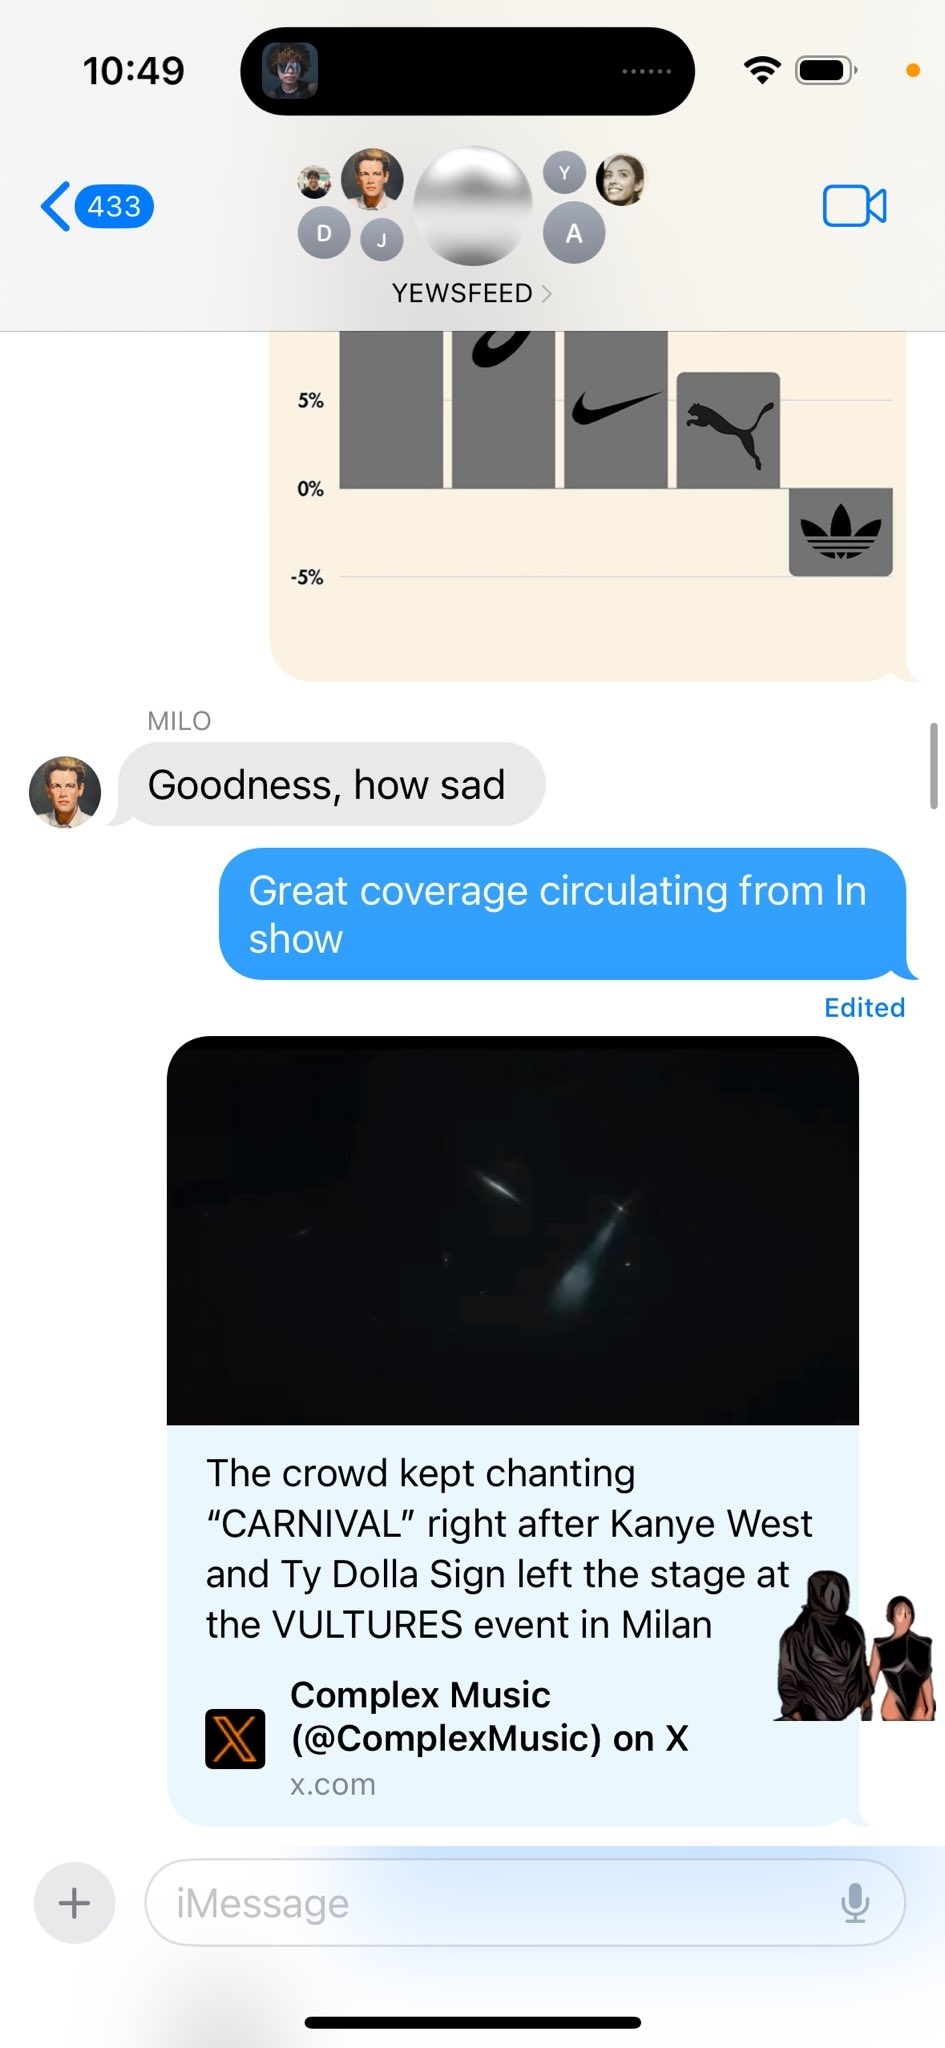 Text exchange about Kanye West and Ty Dolla $ign leaving stage at VULTURES event in Milan, with a dark performance photo attached